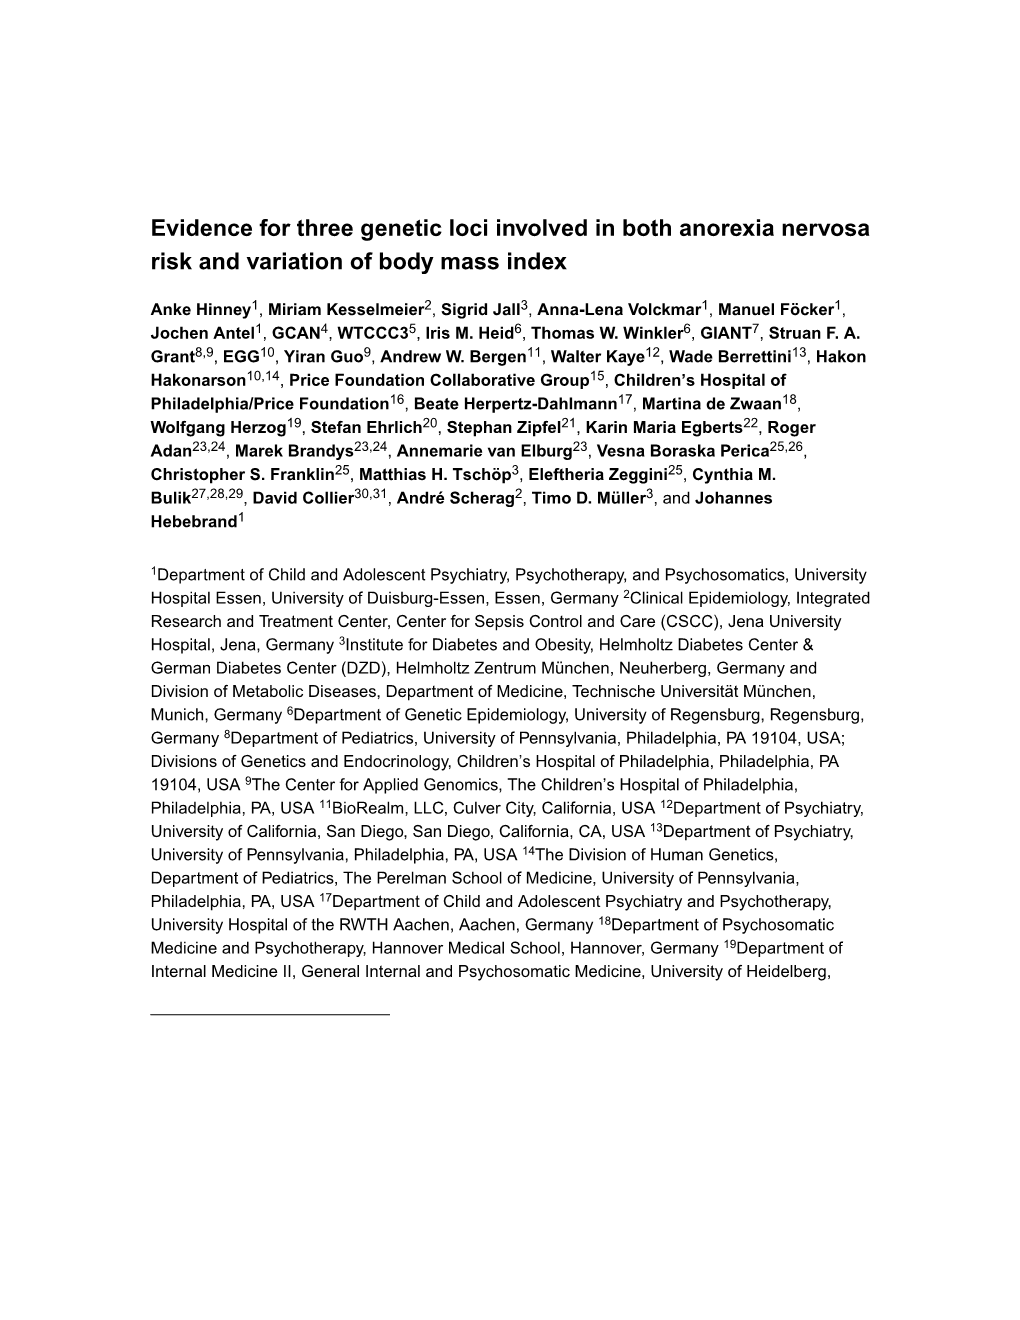 Evidence for Three Genetic Loci Involved in Both Anorexia Nervosa Risk and Variation of Body Mass Index